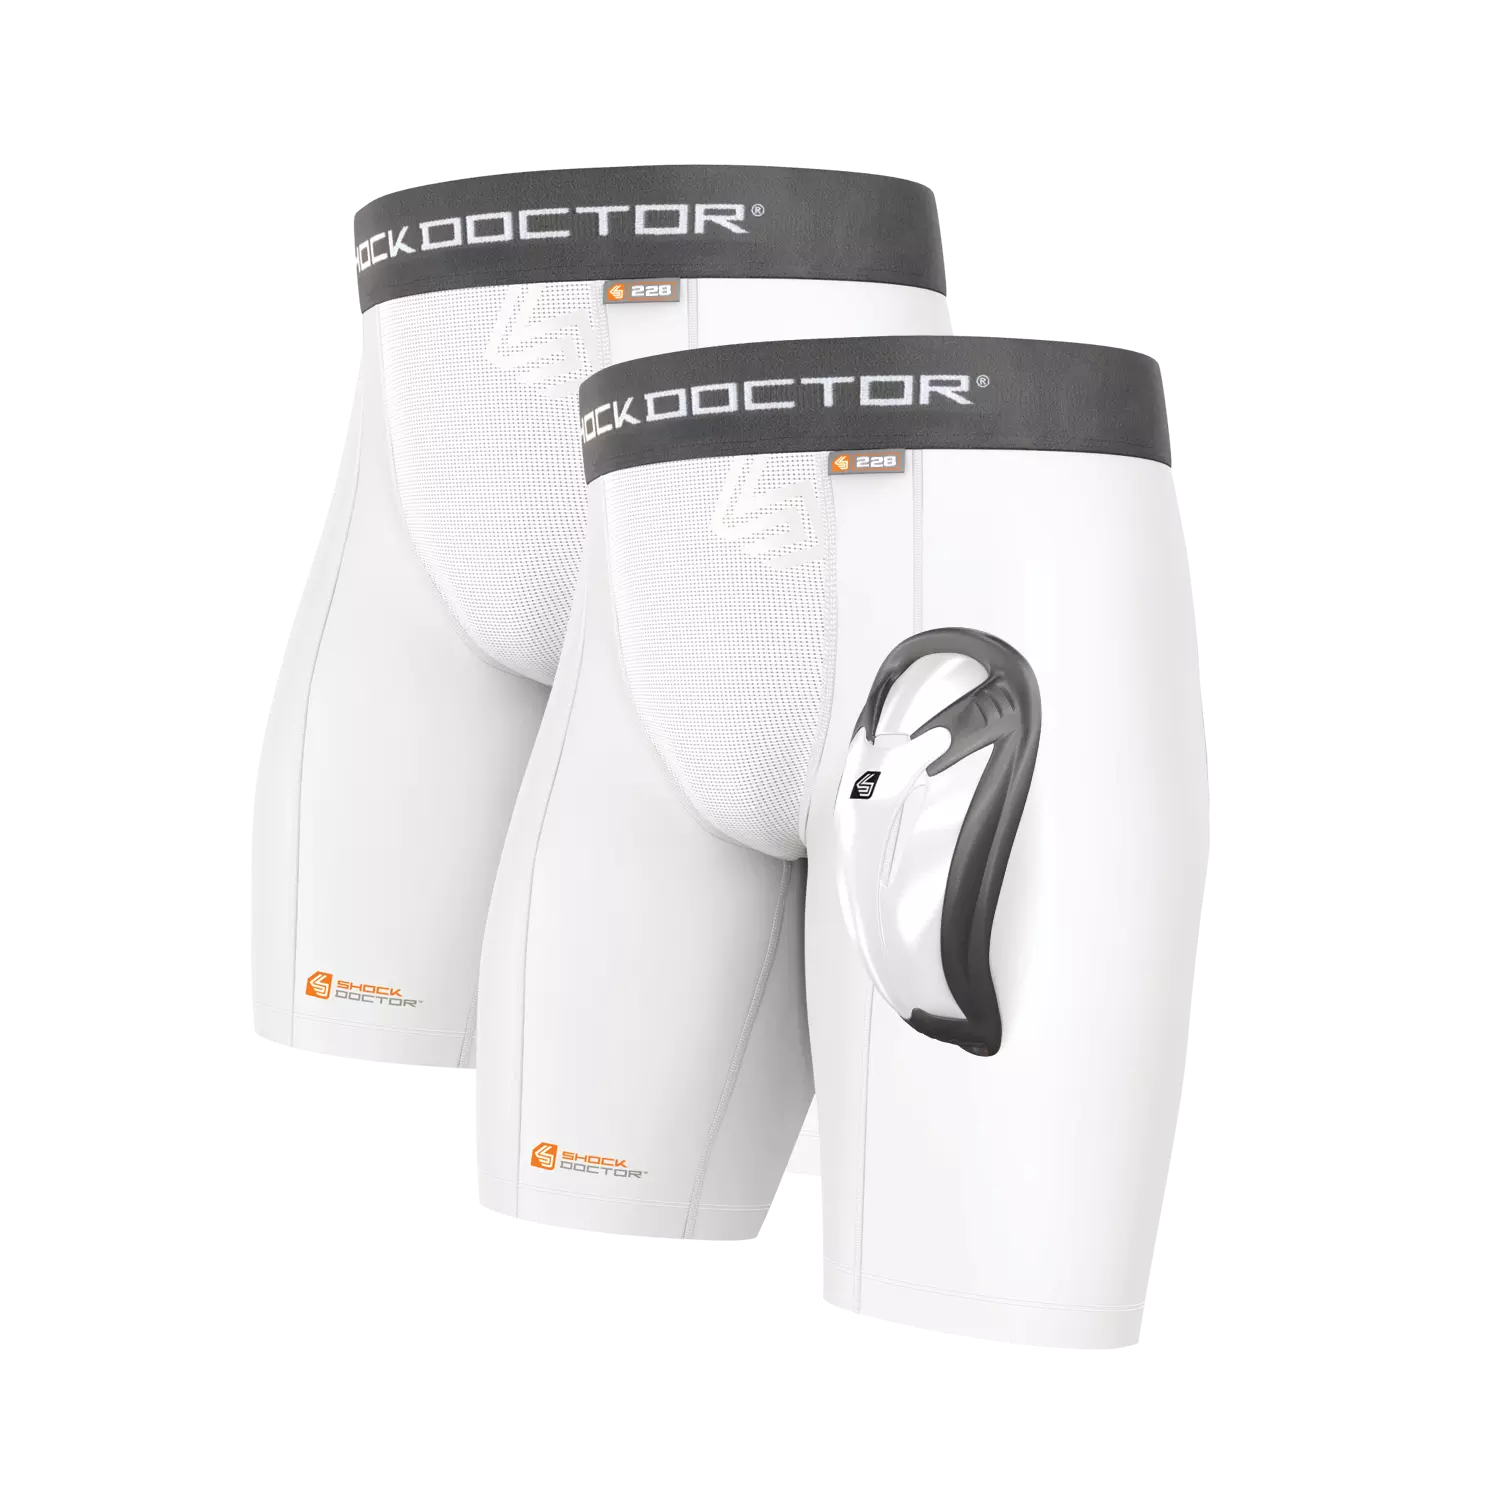 Shock Doctor Core Compression with Bioflex Cup